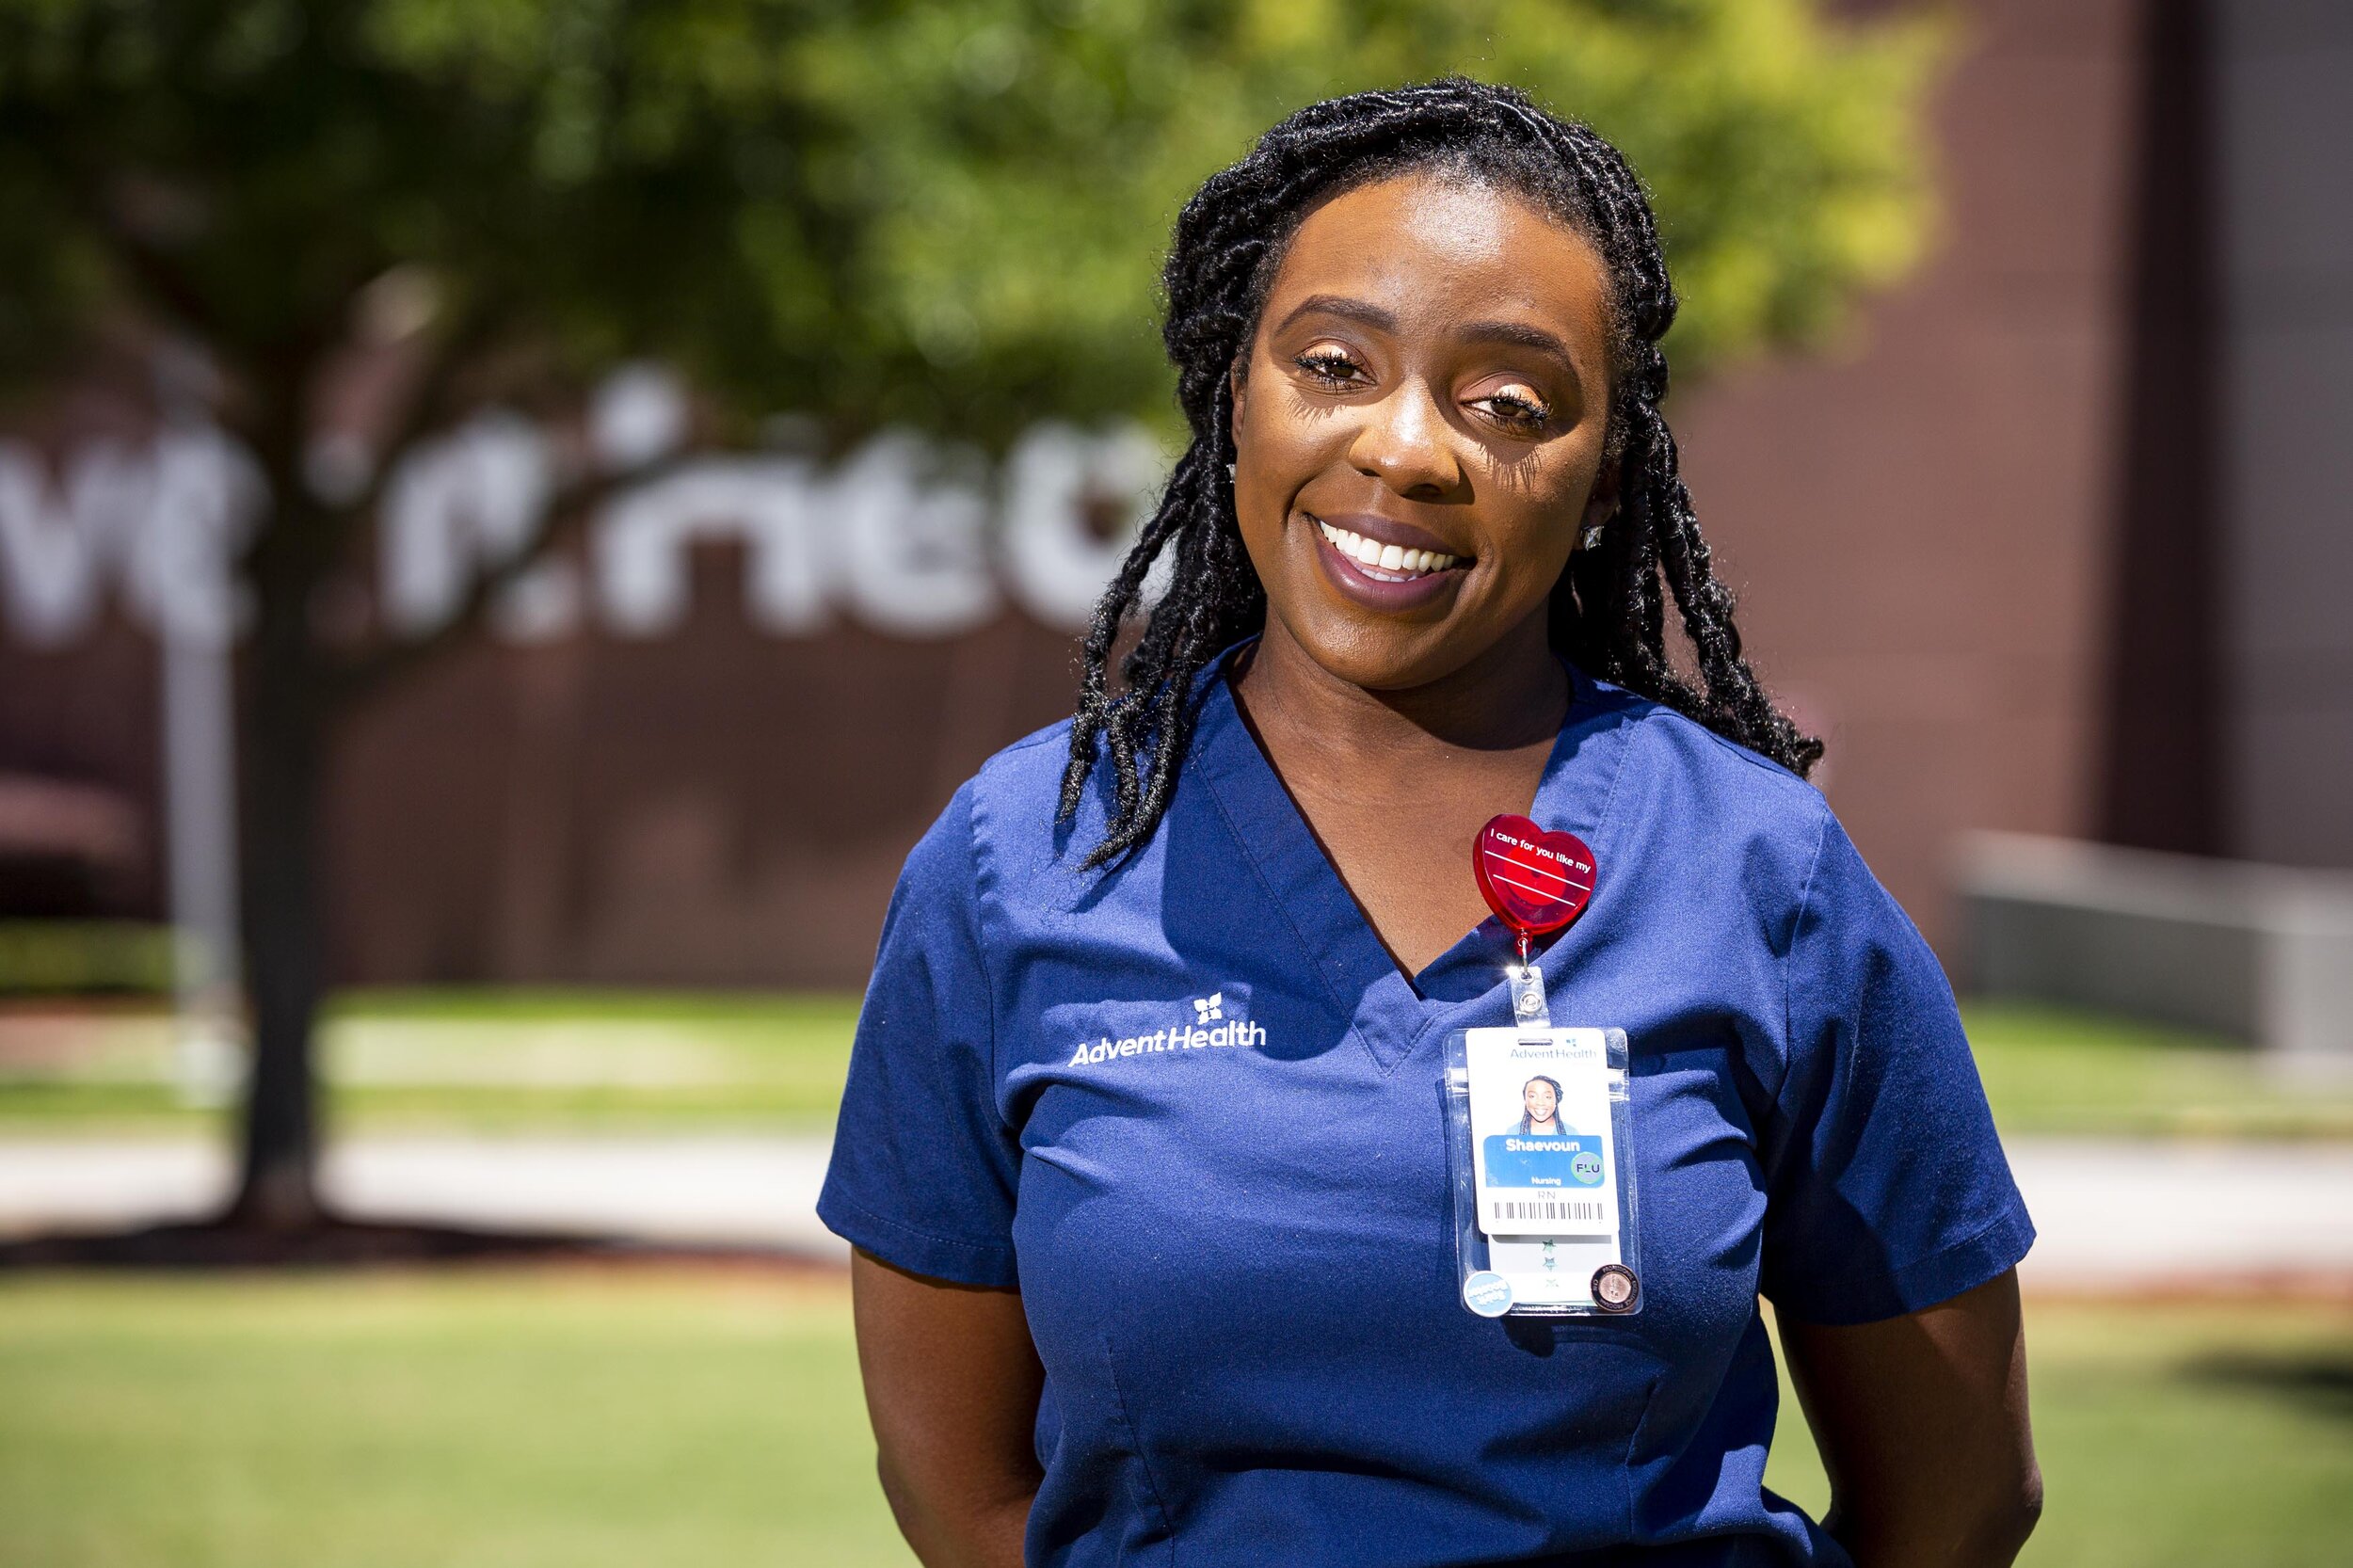  Shaevoun Ogarro, a nurse at AdventHealth, said, "You go into nursing and your goal is to save lives and to make a difference. To see that you're taking care of a patient that has this virus and actually beat the virus and you get to wheel them downs